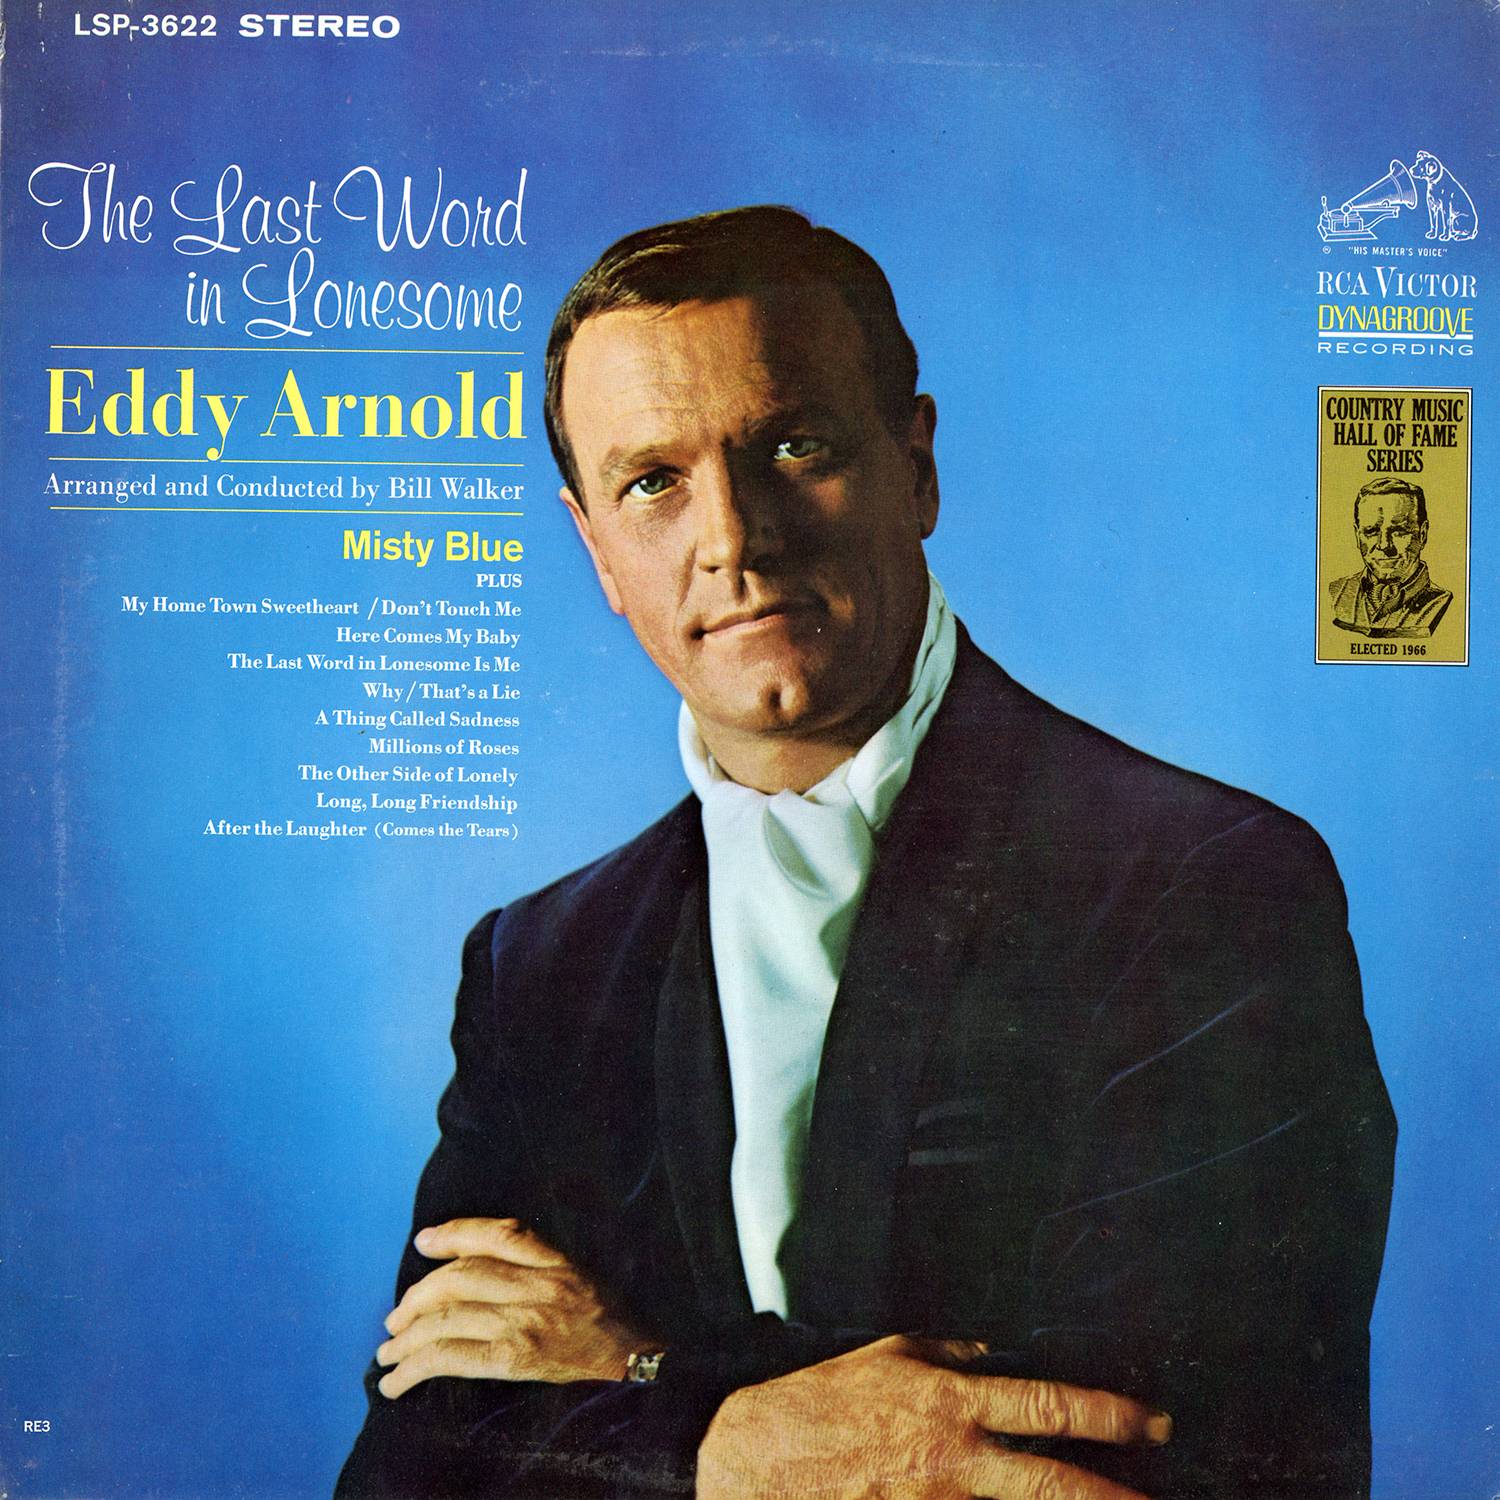 Eddy Arnold - The Last Word In Lonesome (1966/2016) [AcousticSounds FLAC 24bit/192kHz]